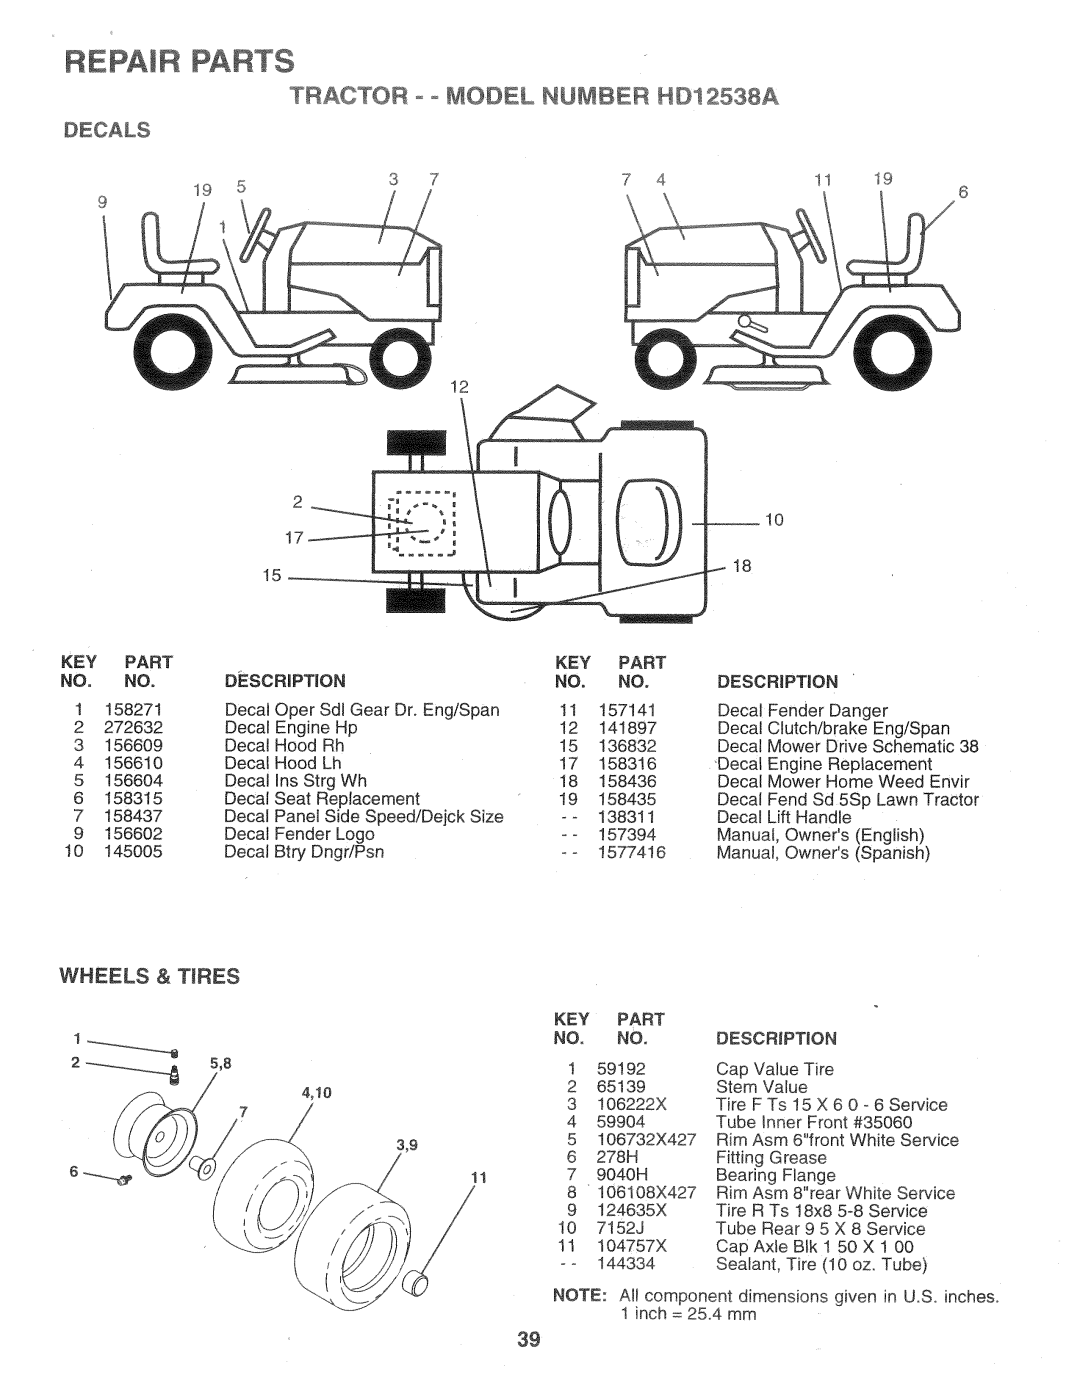 Weed Eater 157394, HD12538A manual 